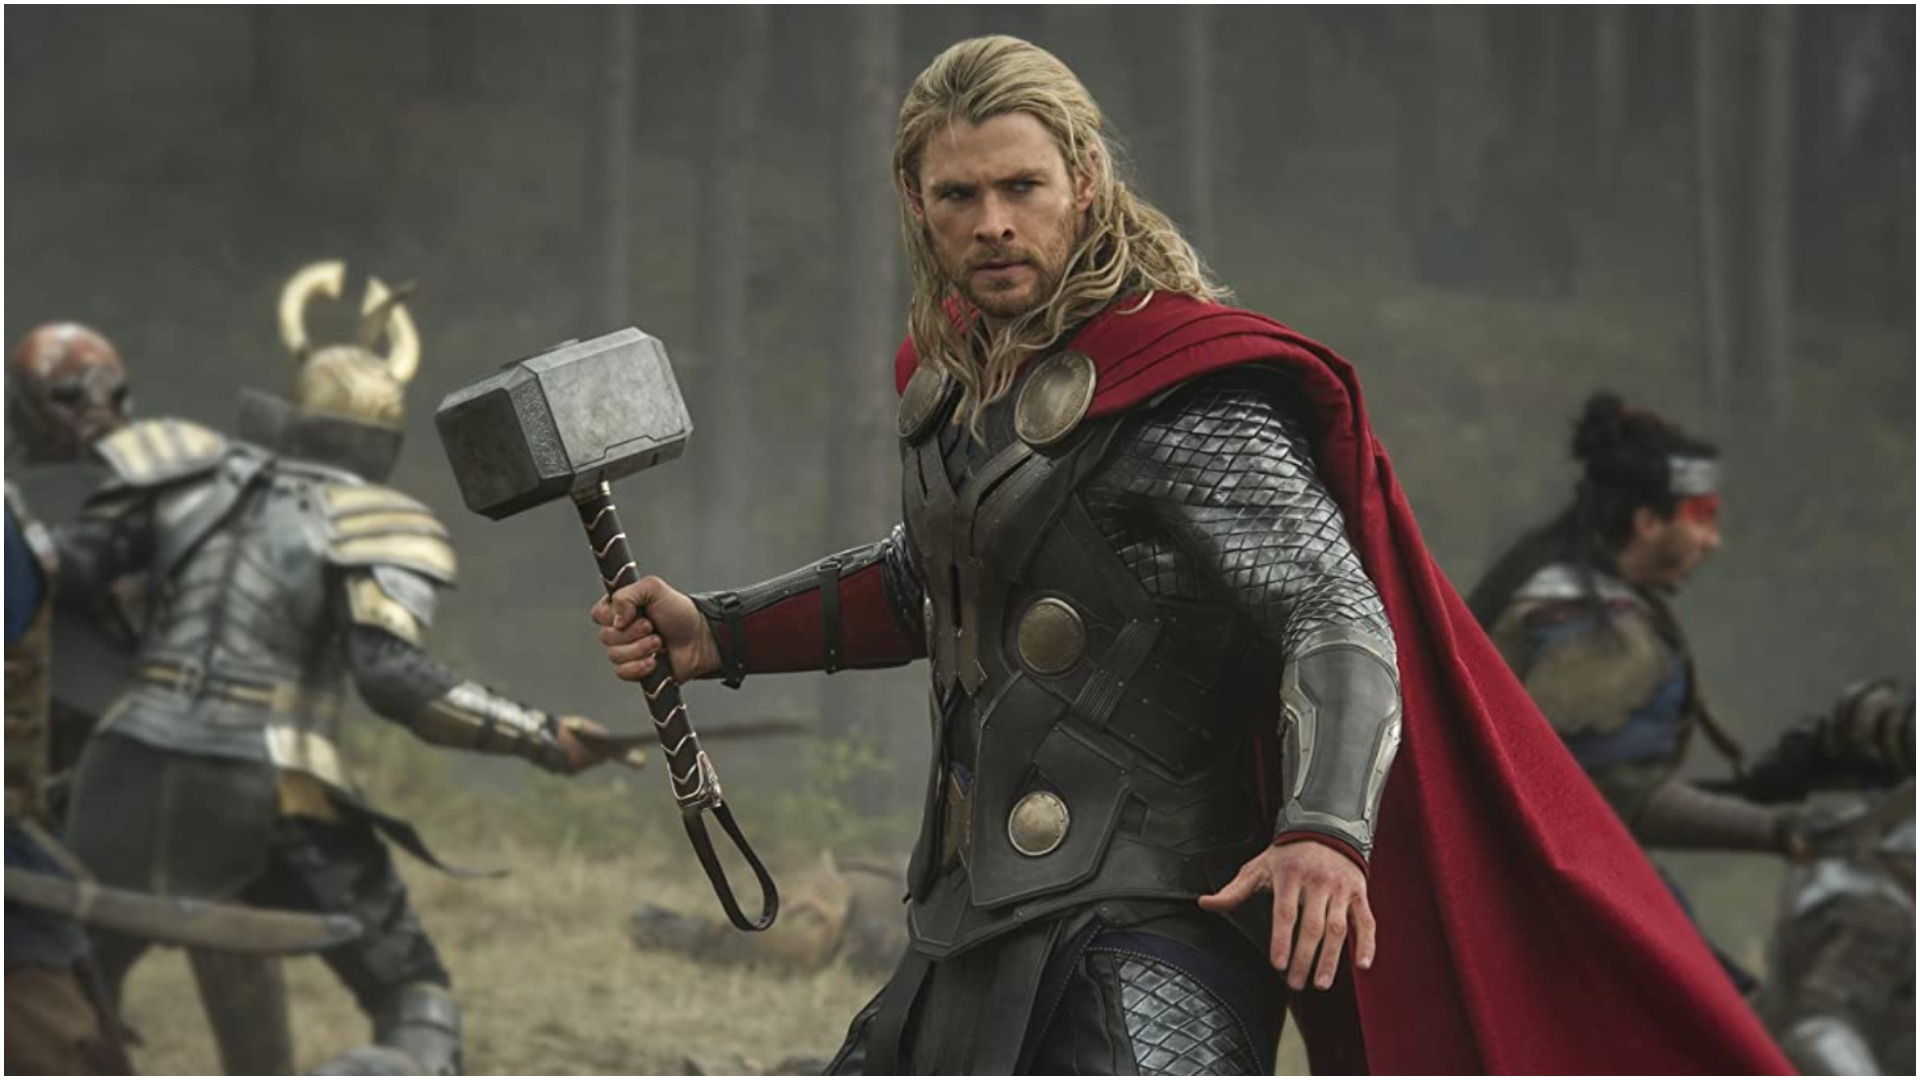 Chris Hemsworth might have secretly revealed the Thor 4 trailer release date, according to Marvel fans